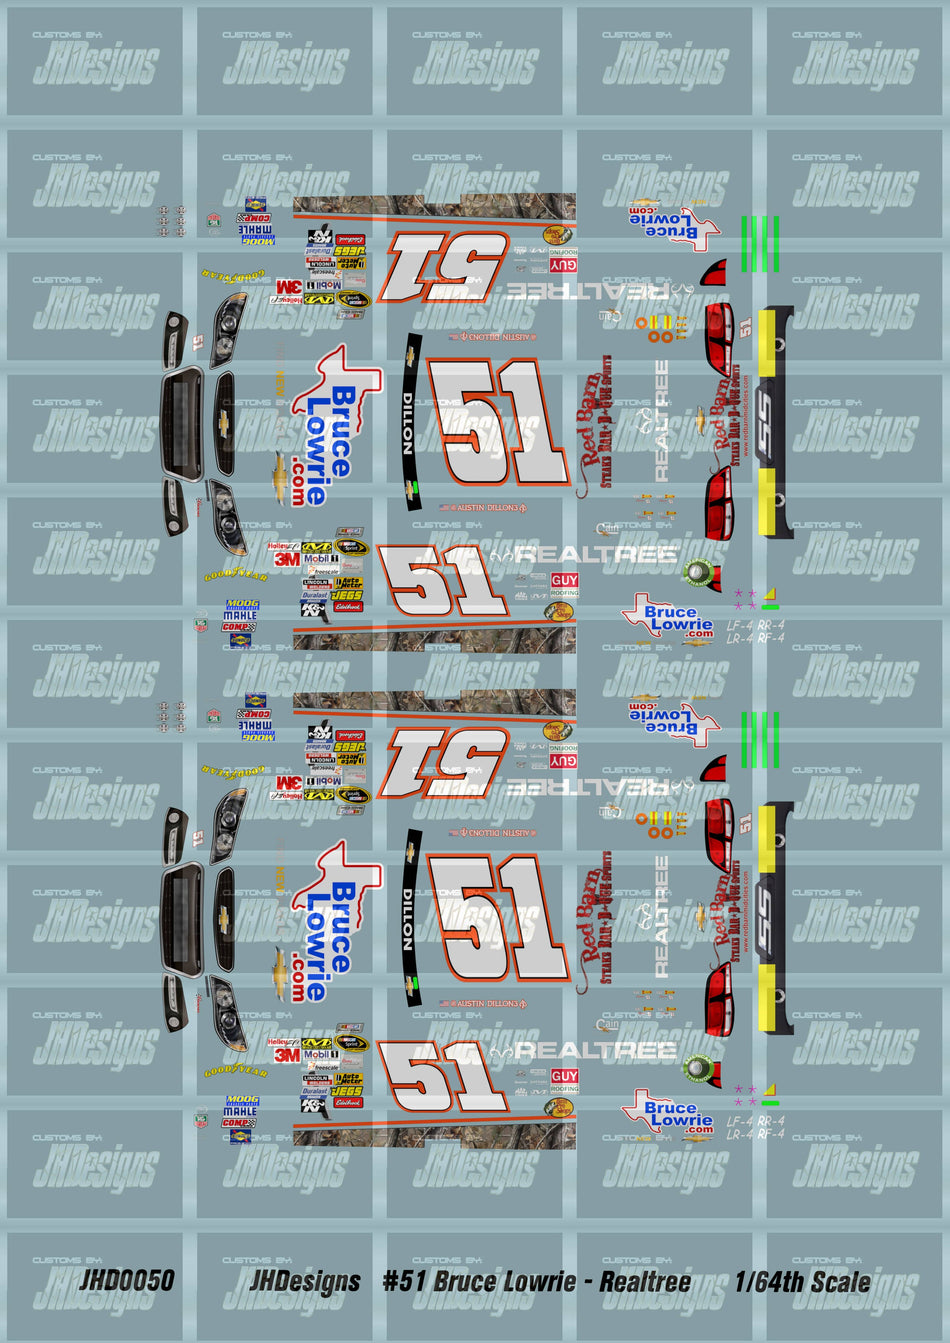 JH Designs Austin Dillon 2013 CUP #51 Bruce Lowrie Chevrolet - Realtree 1:64 Racecar Decal Set